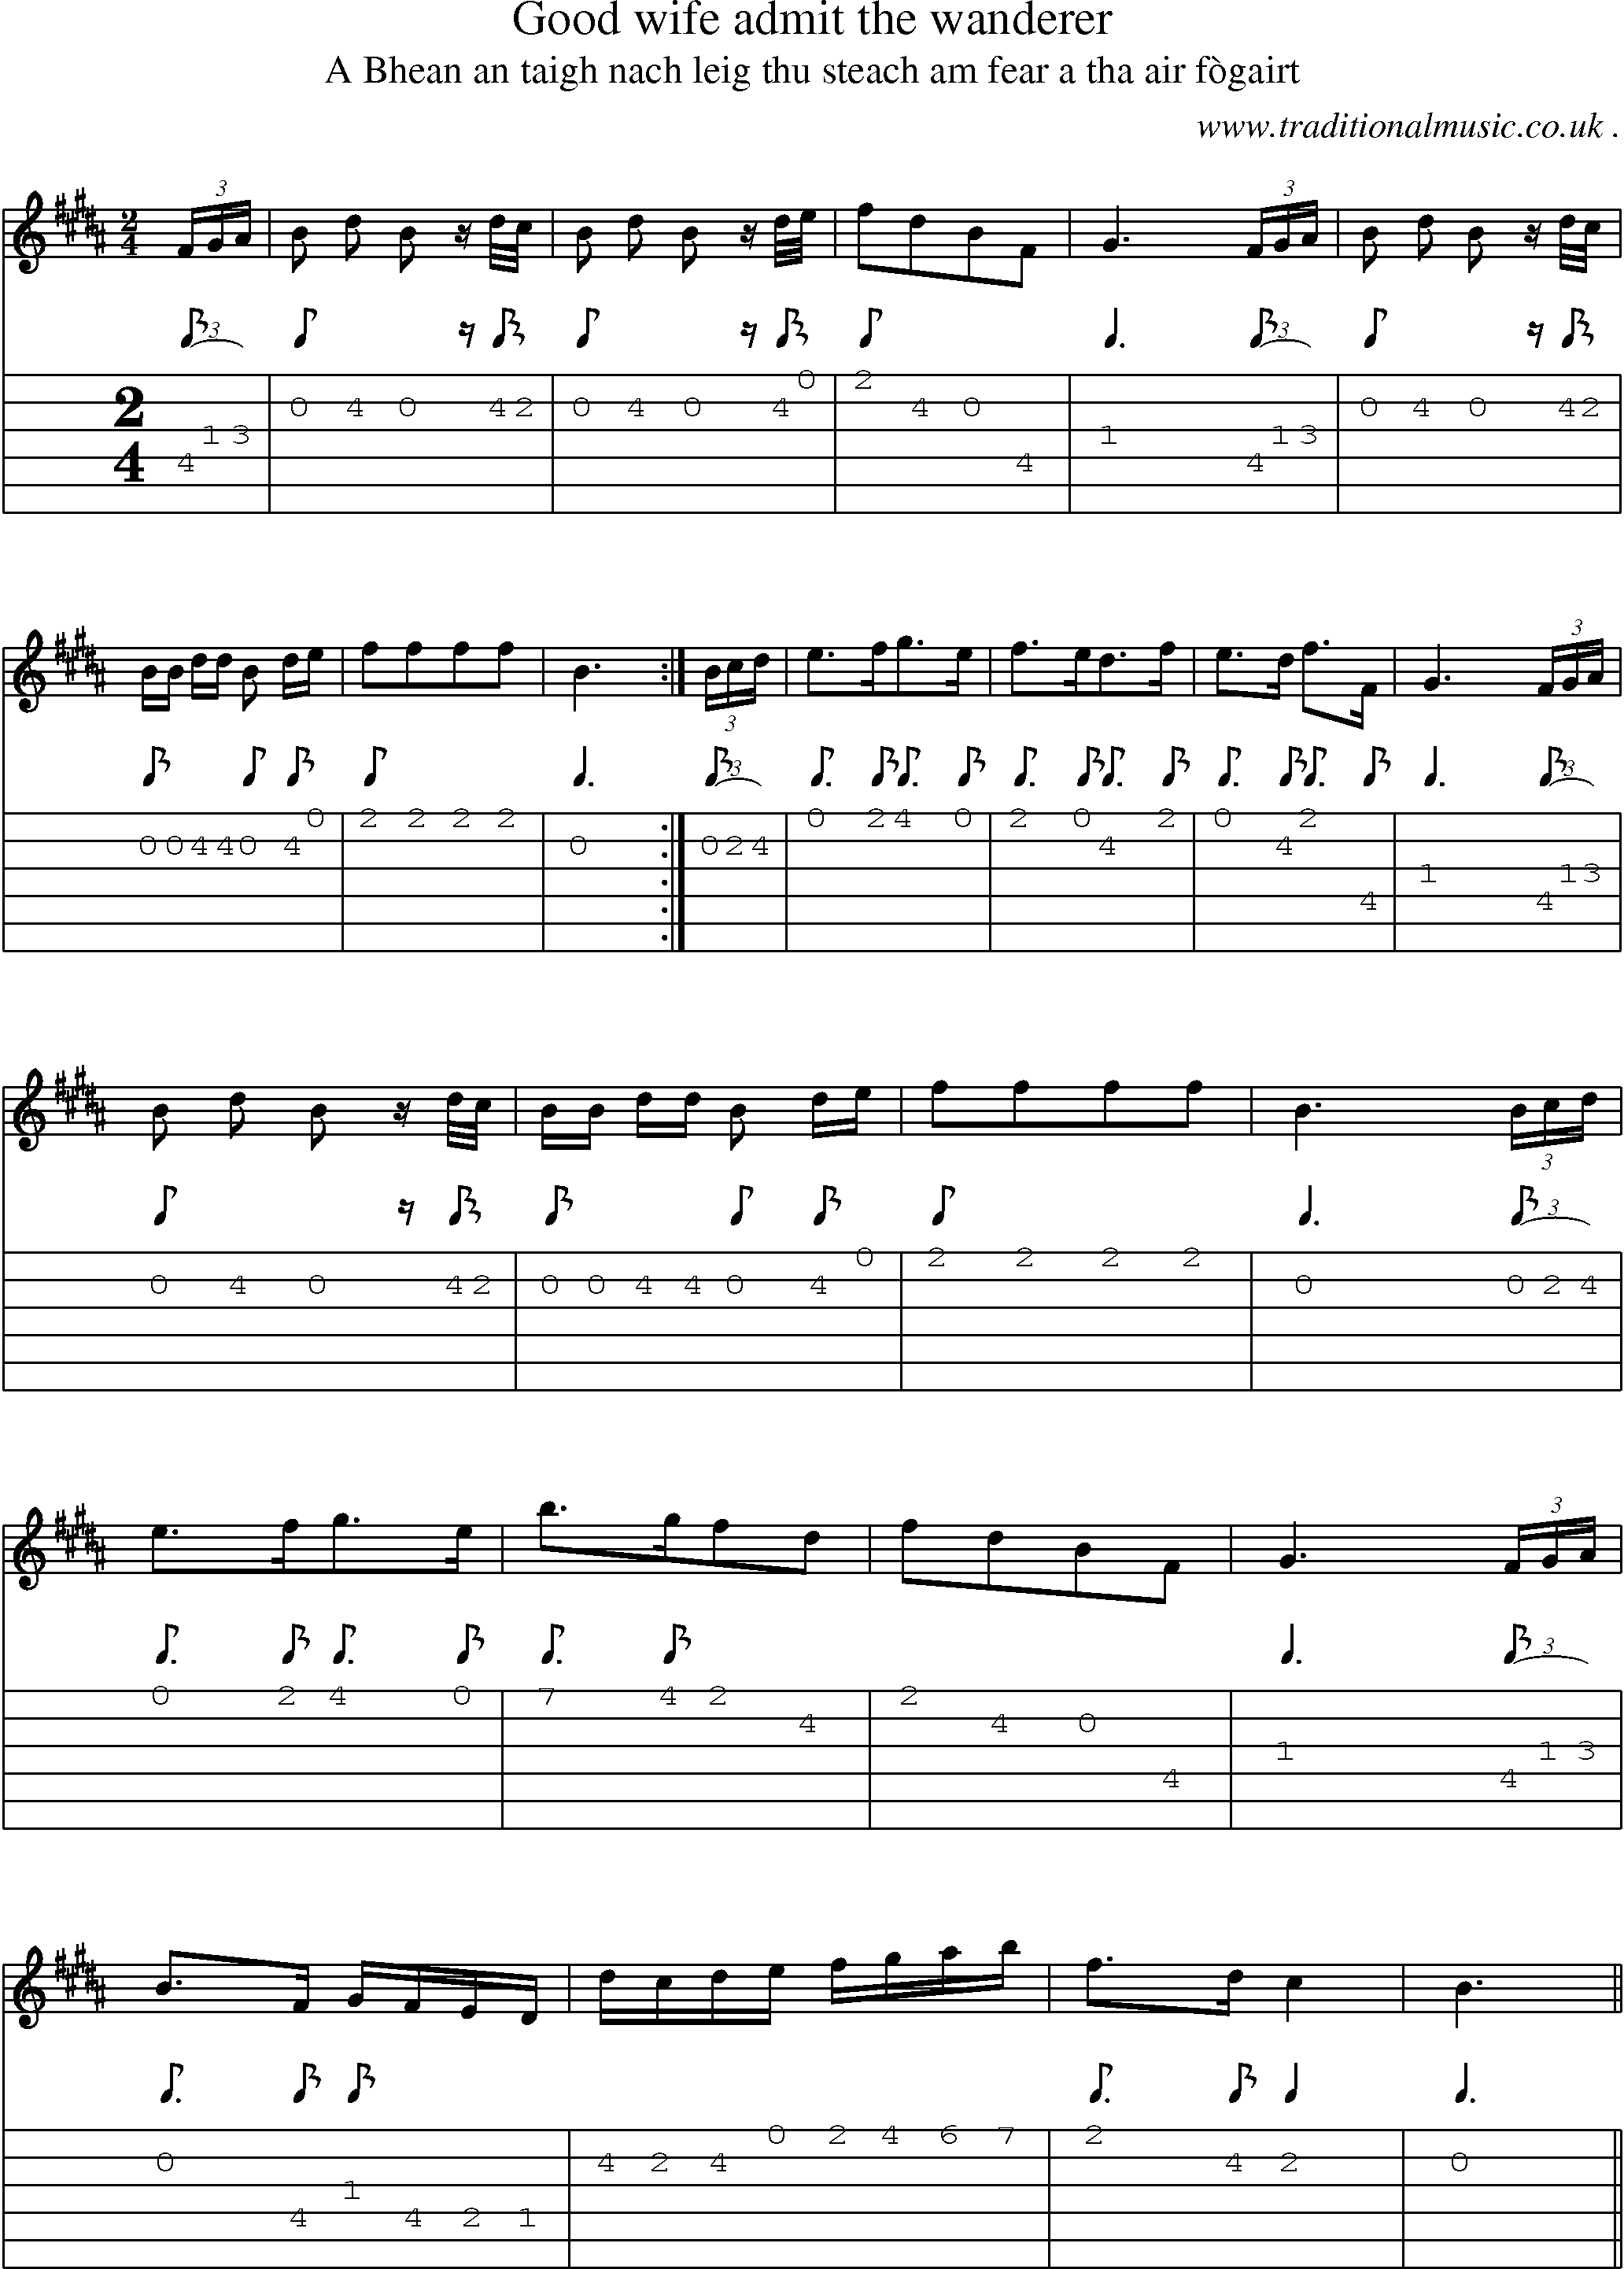 Sheet-music  score, Chords and Guitar Tabs for Good Wife Admit The Wanderer